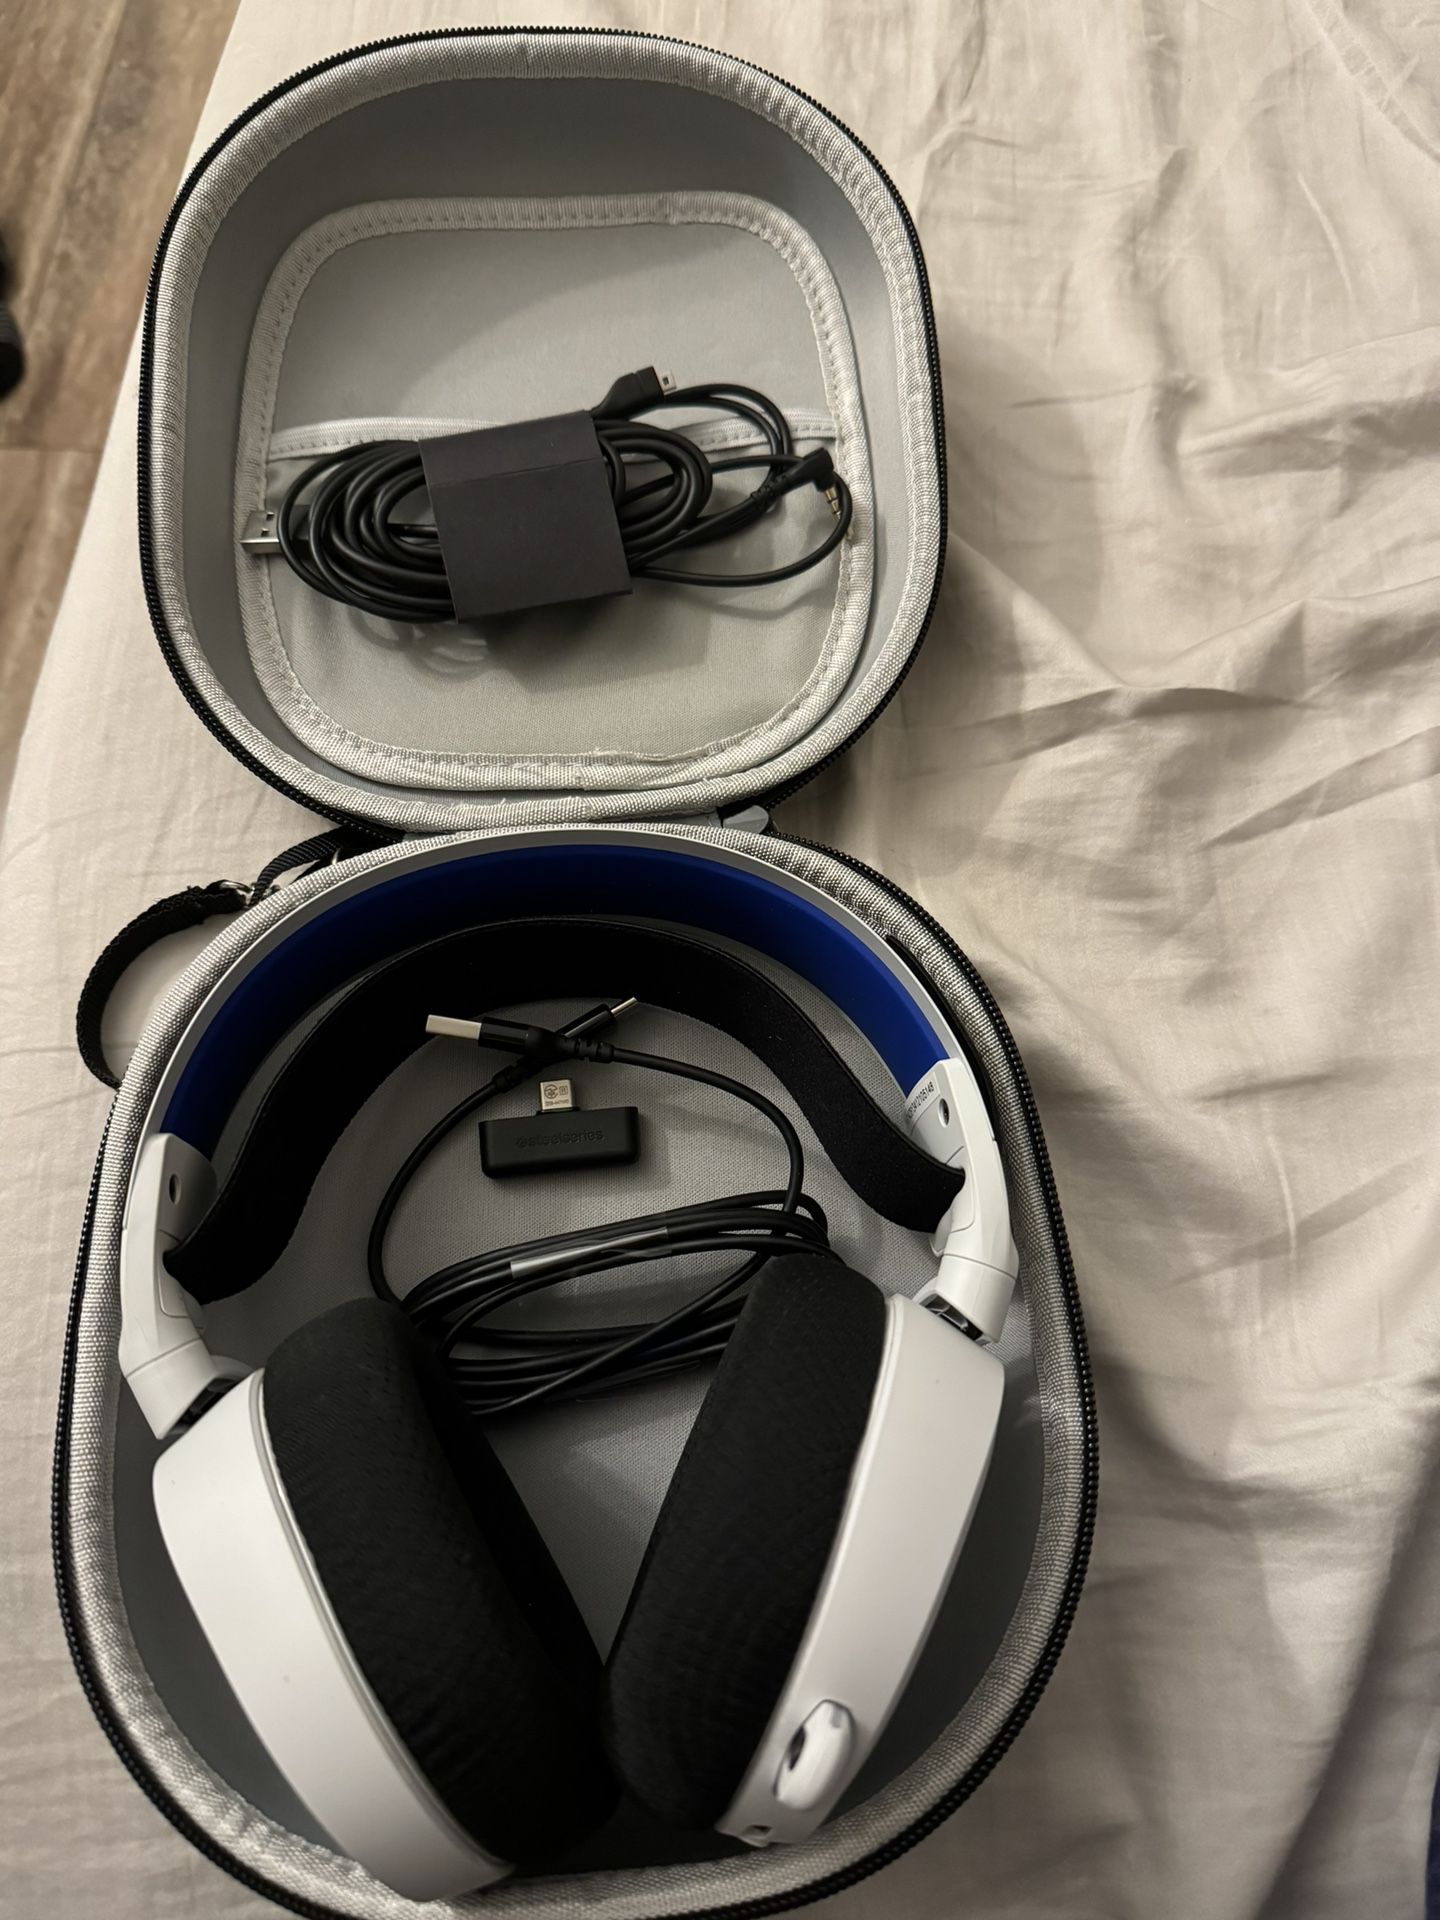 Steelseries 7p+ Headset With Case Usb C Like New  PlayStation 5 And Others Gaming Headphones with Mic